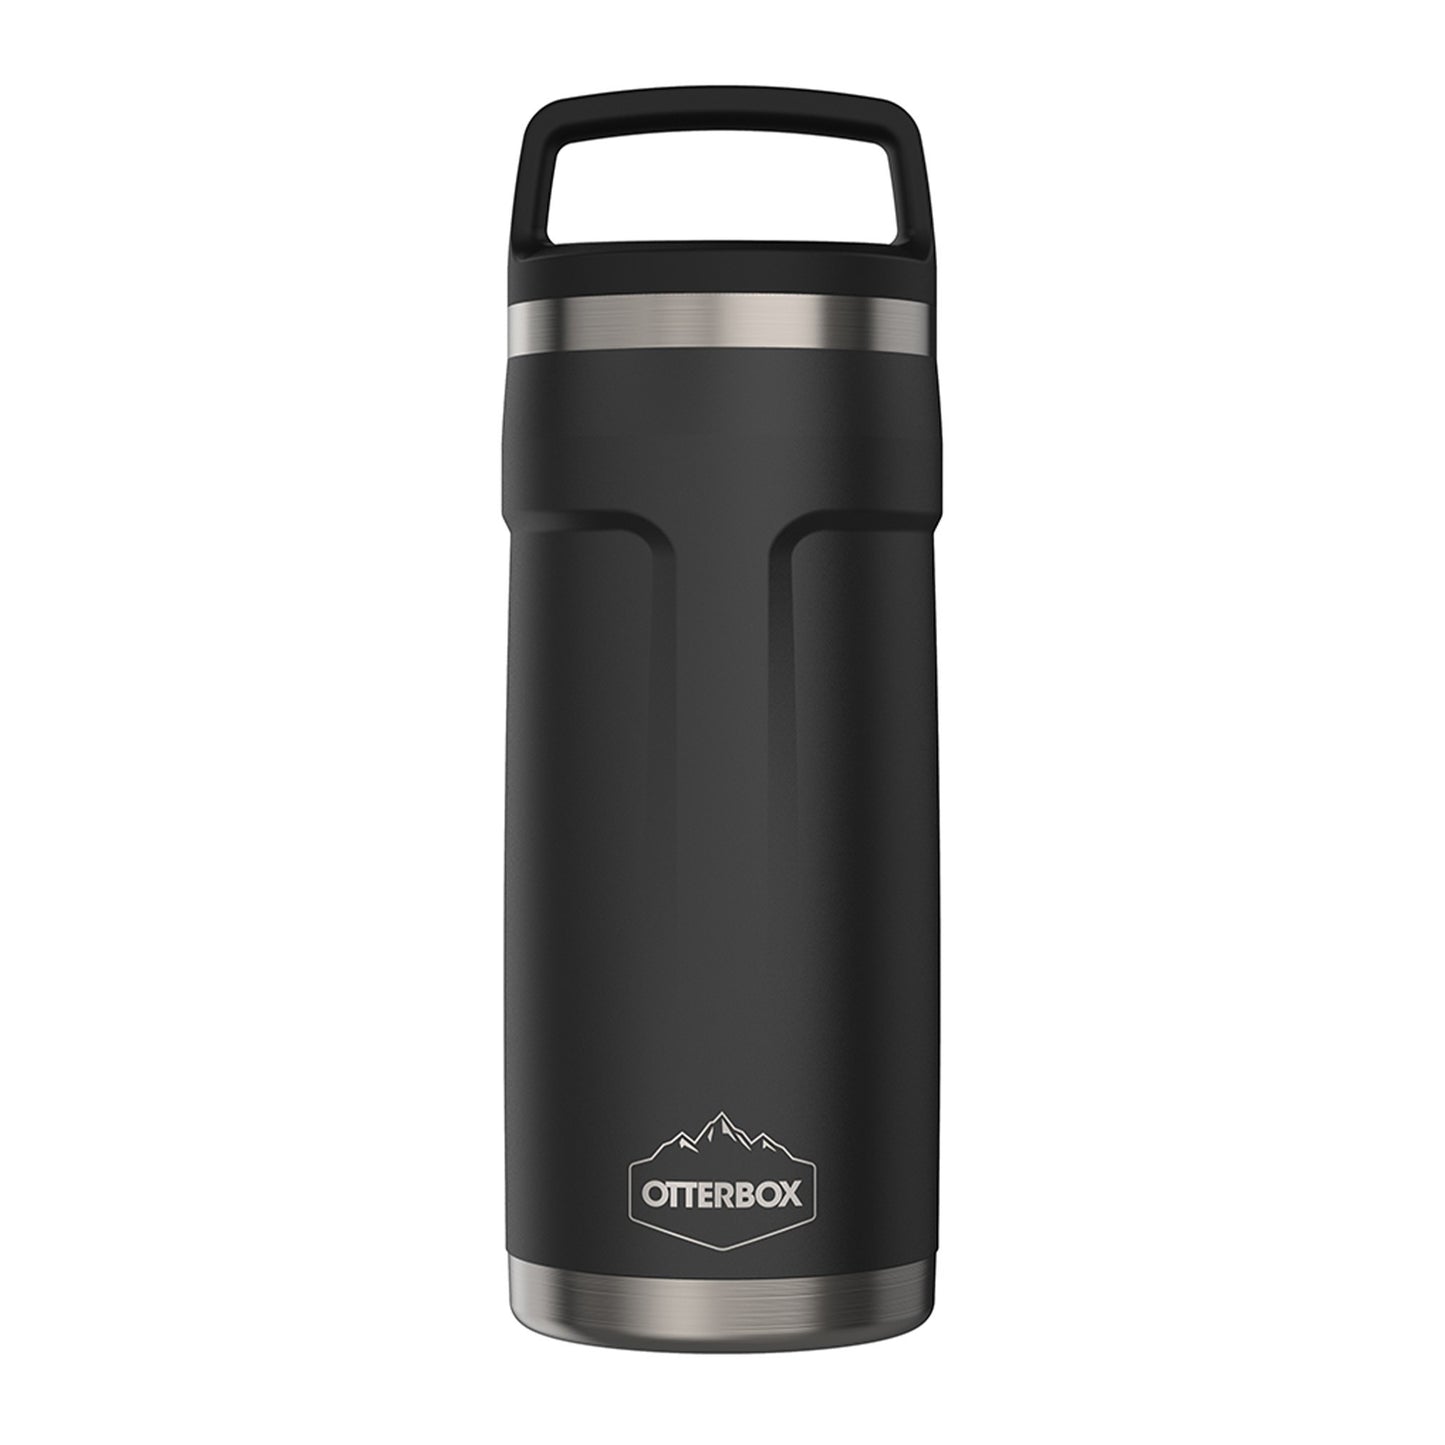 Otterbox 28oz Elevation Growler w/Screw On Lid - Black/Silver (Silver Panther) - 15-11830